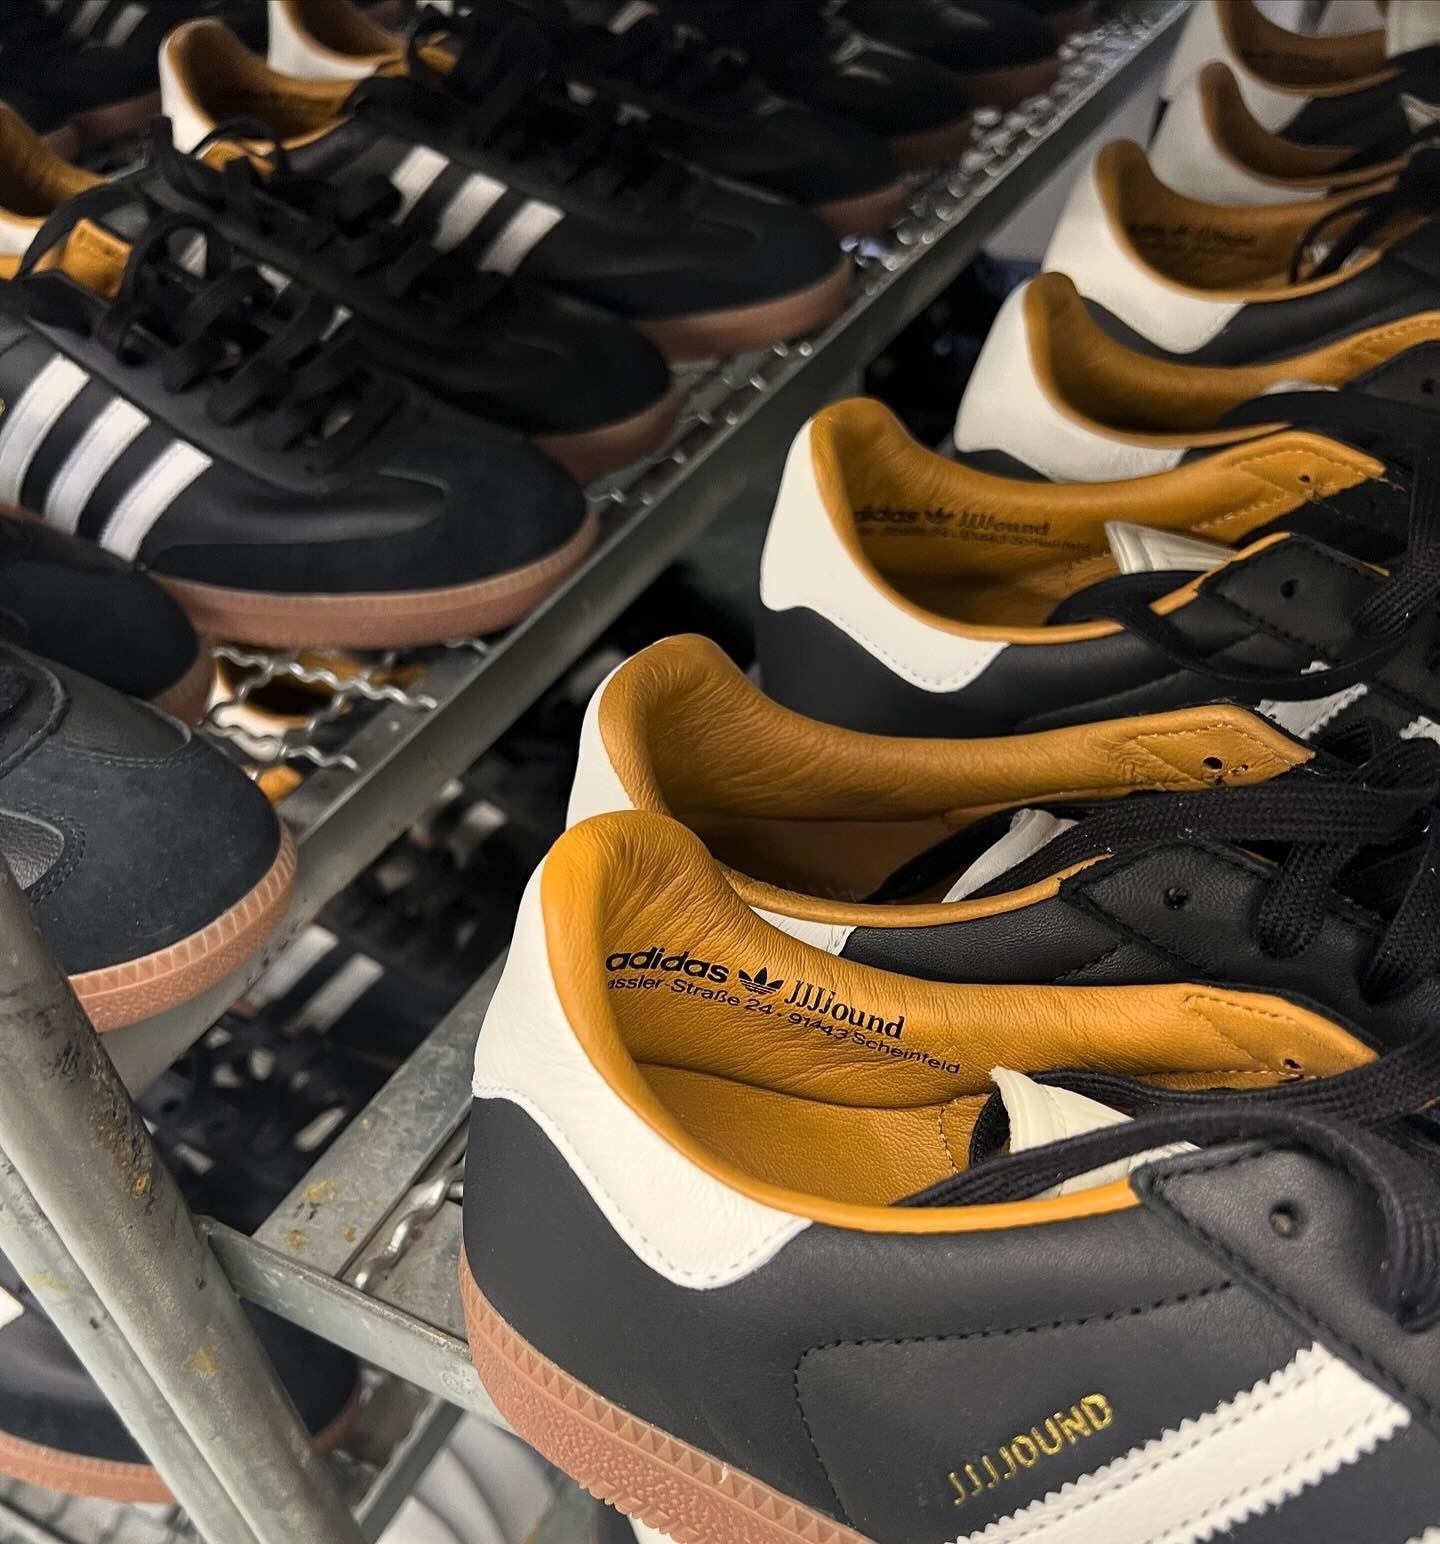 Close-up of Adidas Samba sneakers with distinctive black and tan design on a store shelf